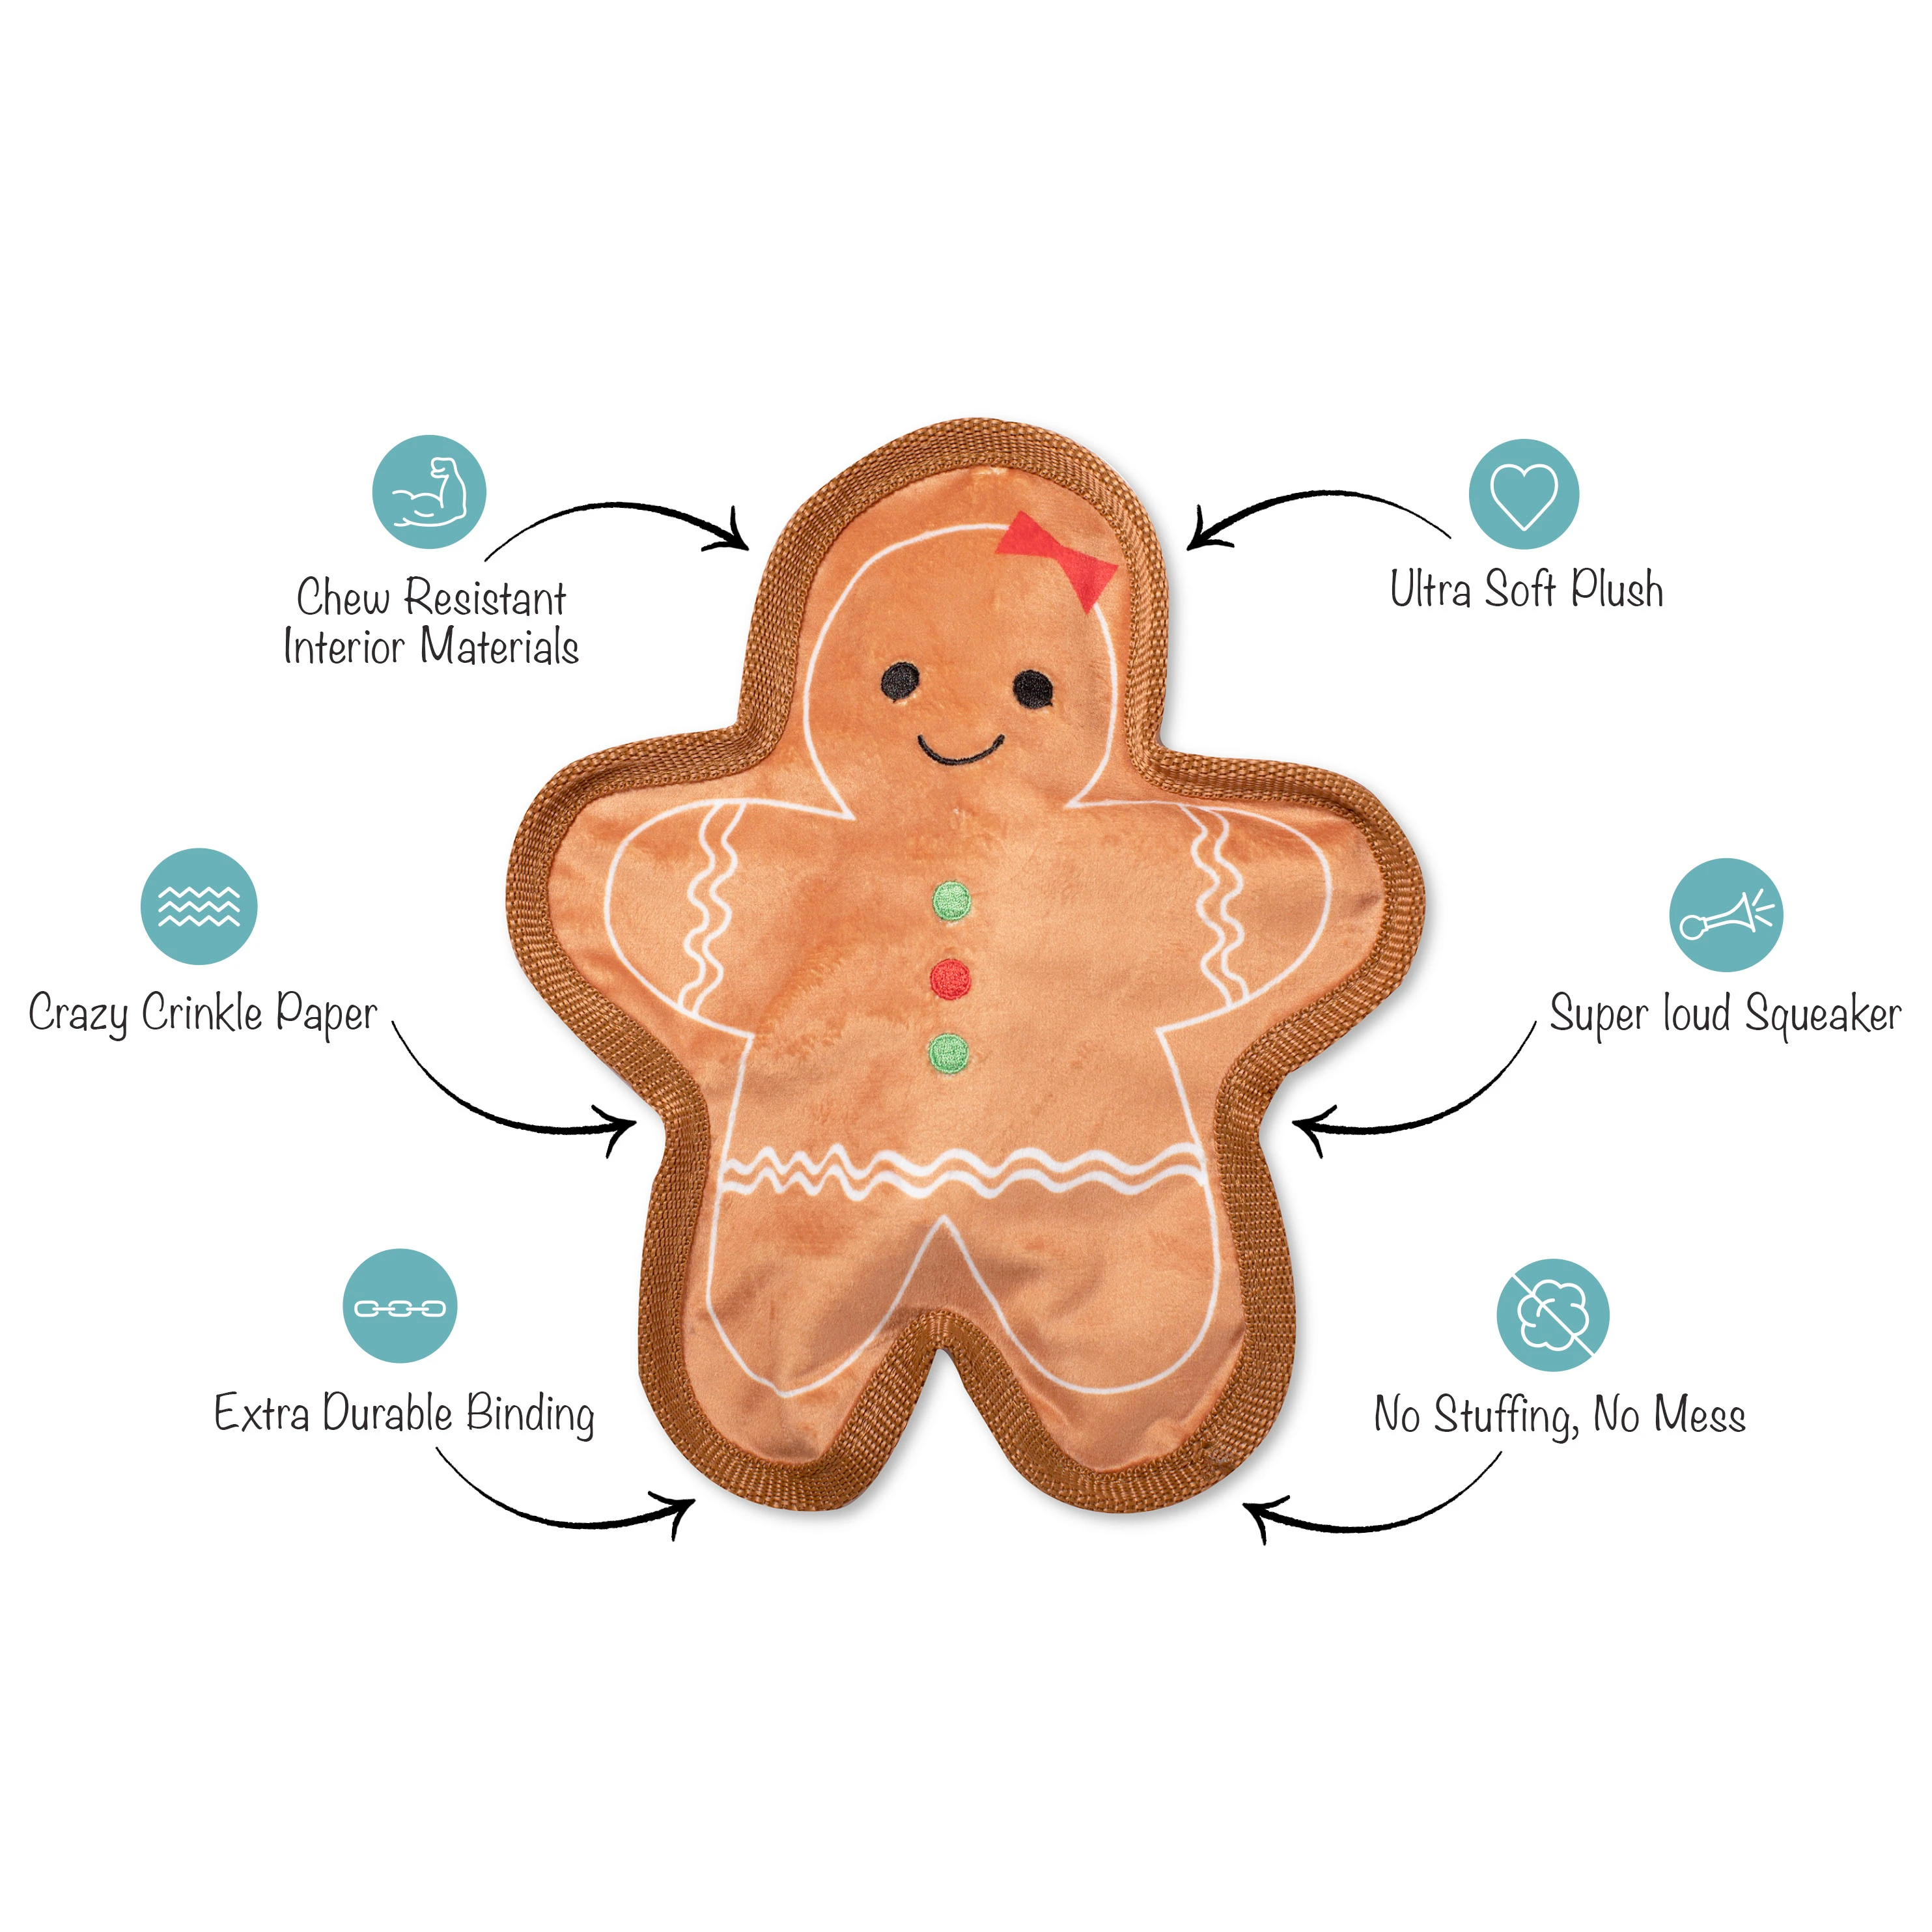 UnStuffed Gingerbread Girl, Dog Squeaky Plush toy